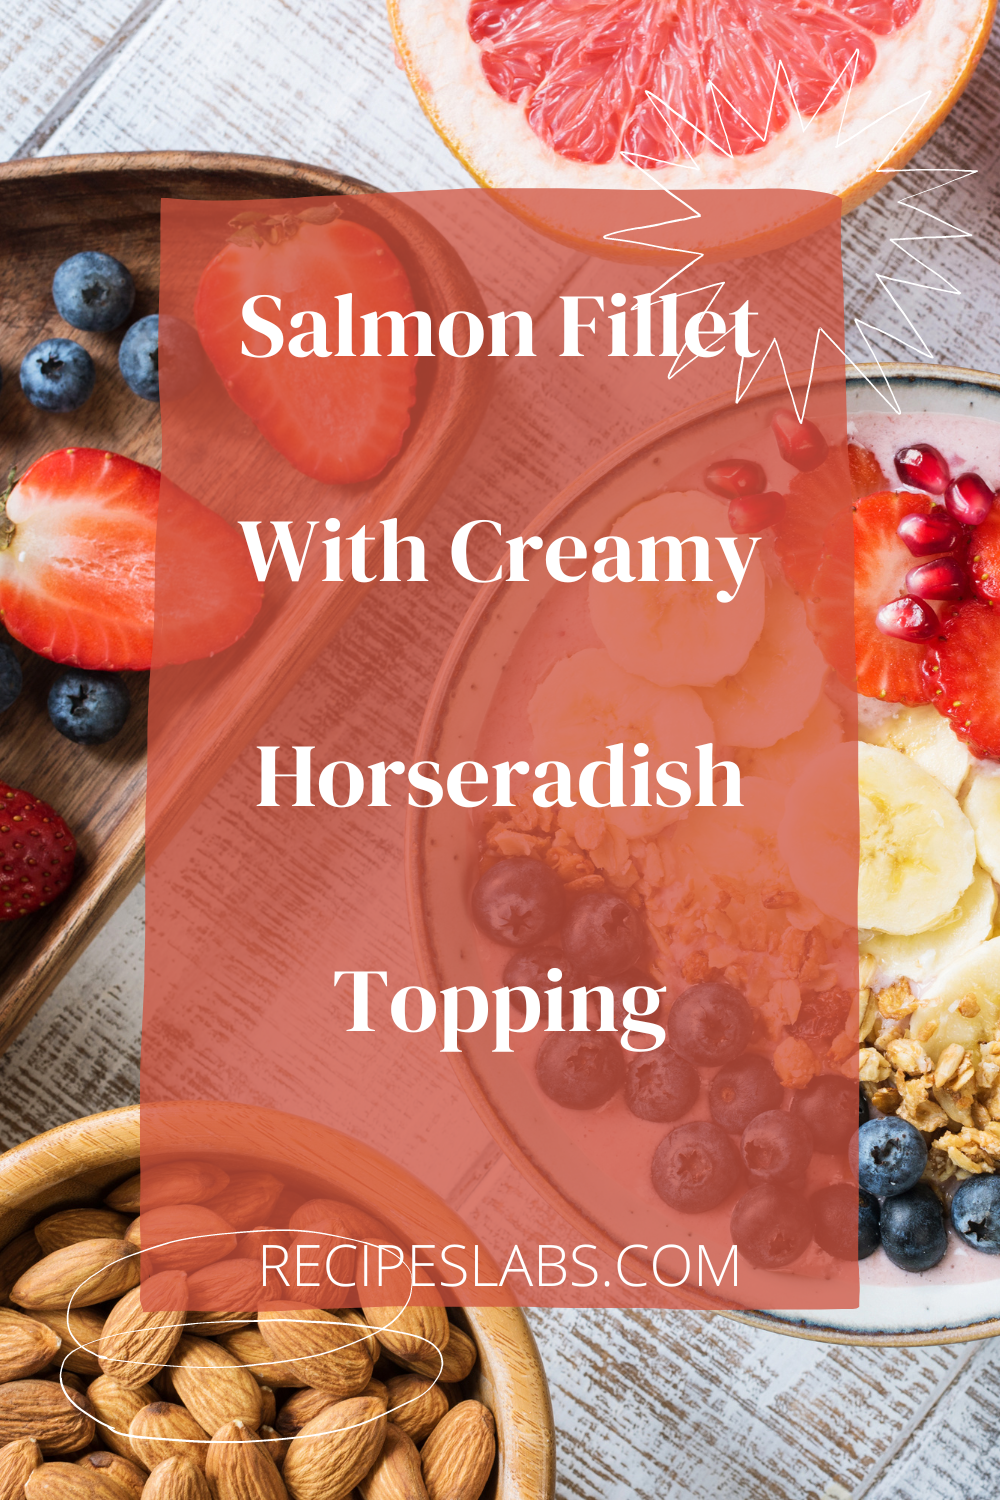 Salmon Fillet With Creamy Horseradish Topping